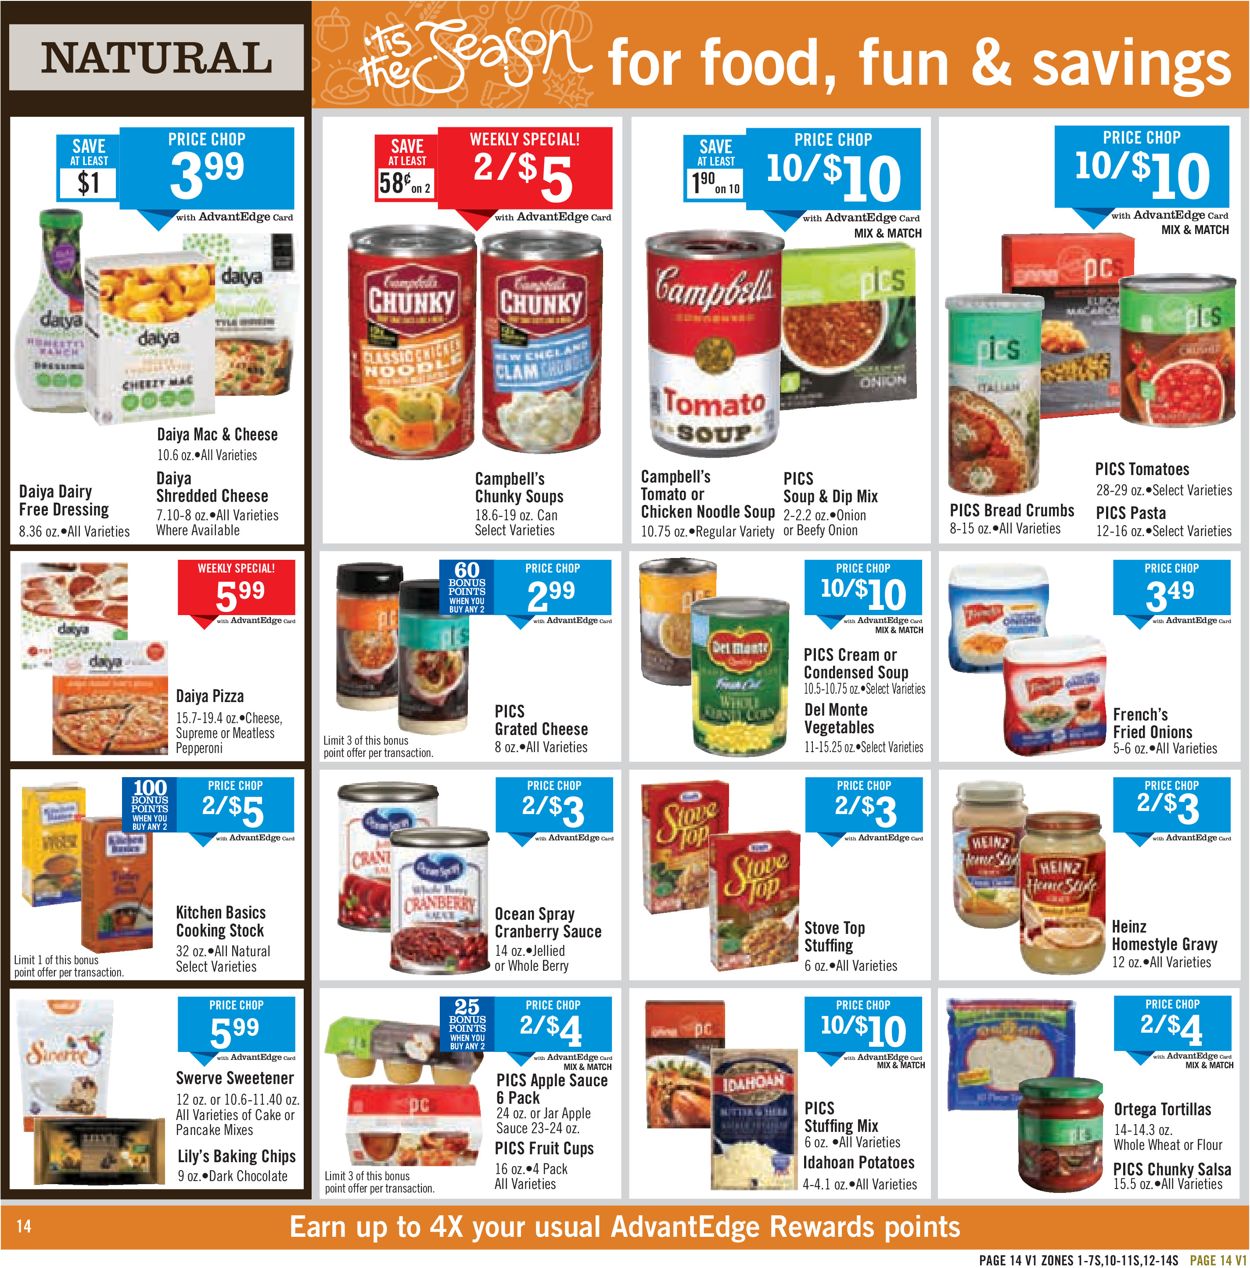 Price Chopper - Thanksgiving Ad 2019 Weekly Ad Circular - valid 11/24-11/30/2019 (Page 18)